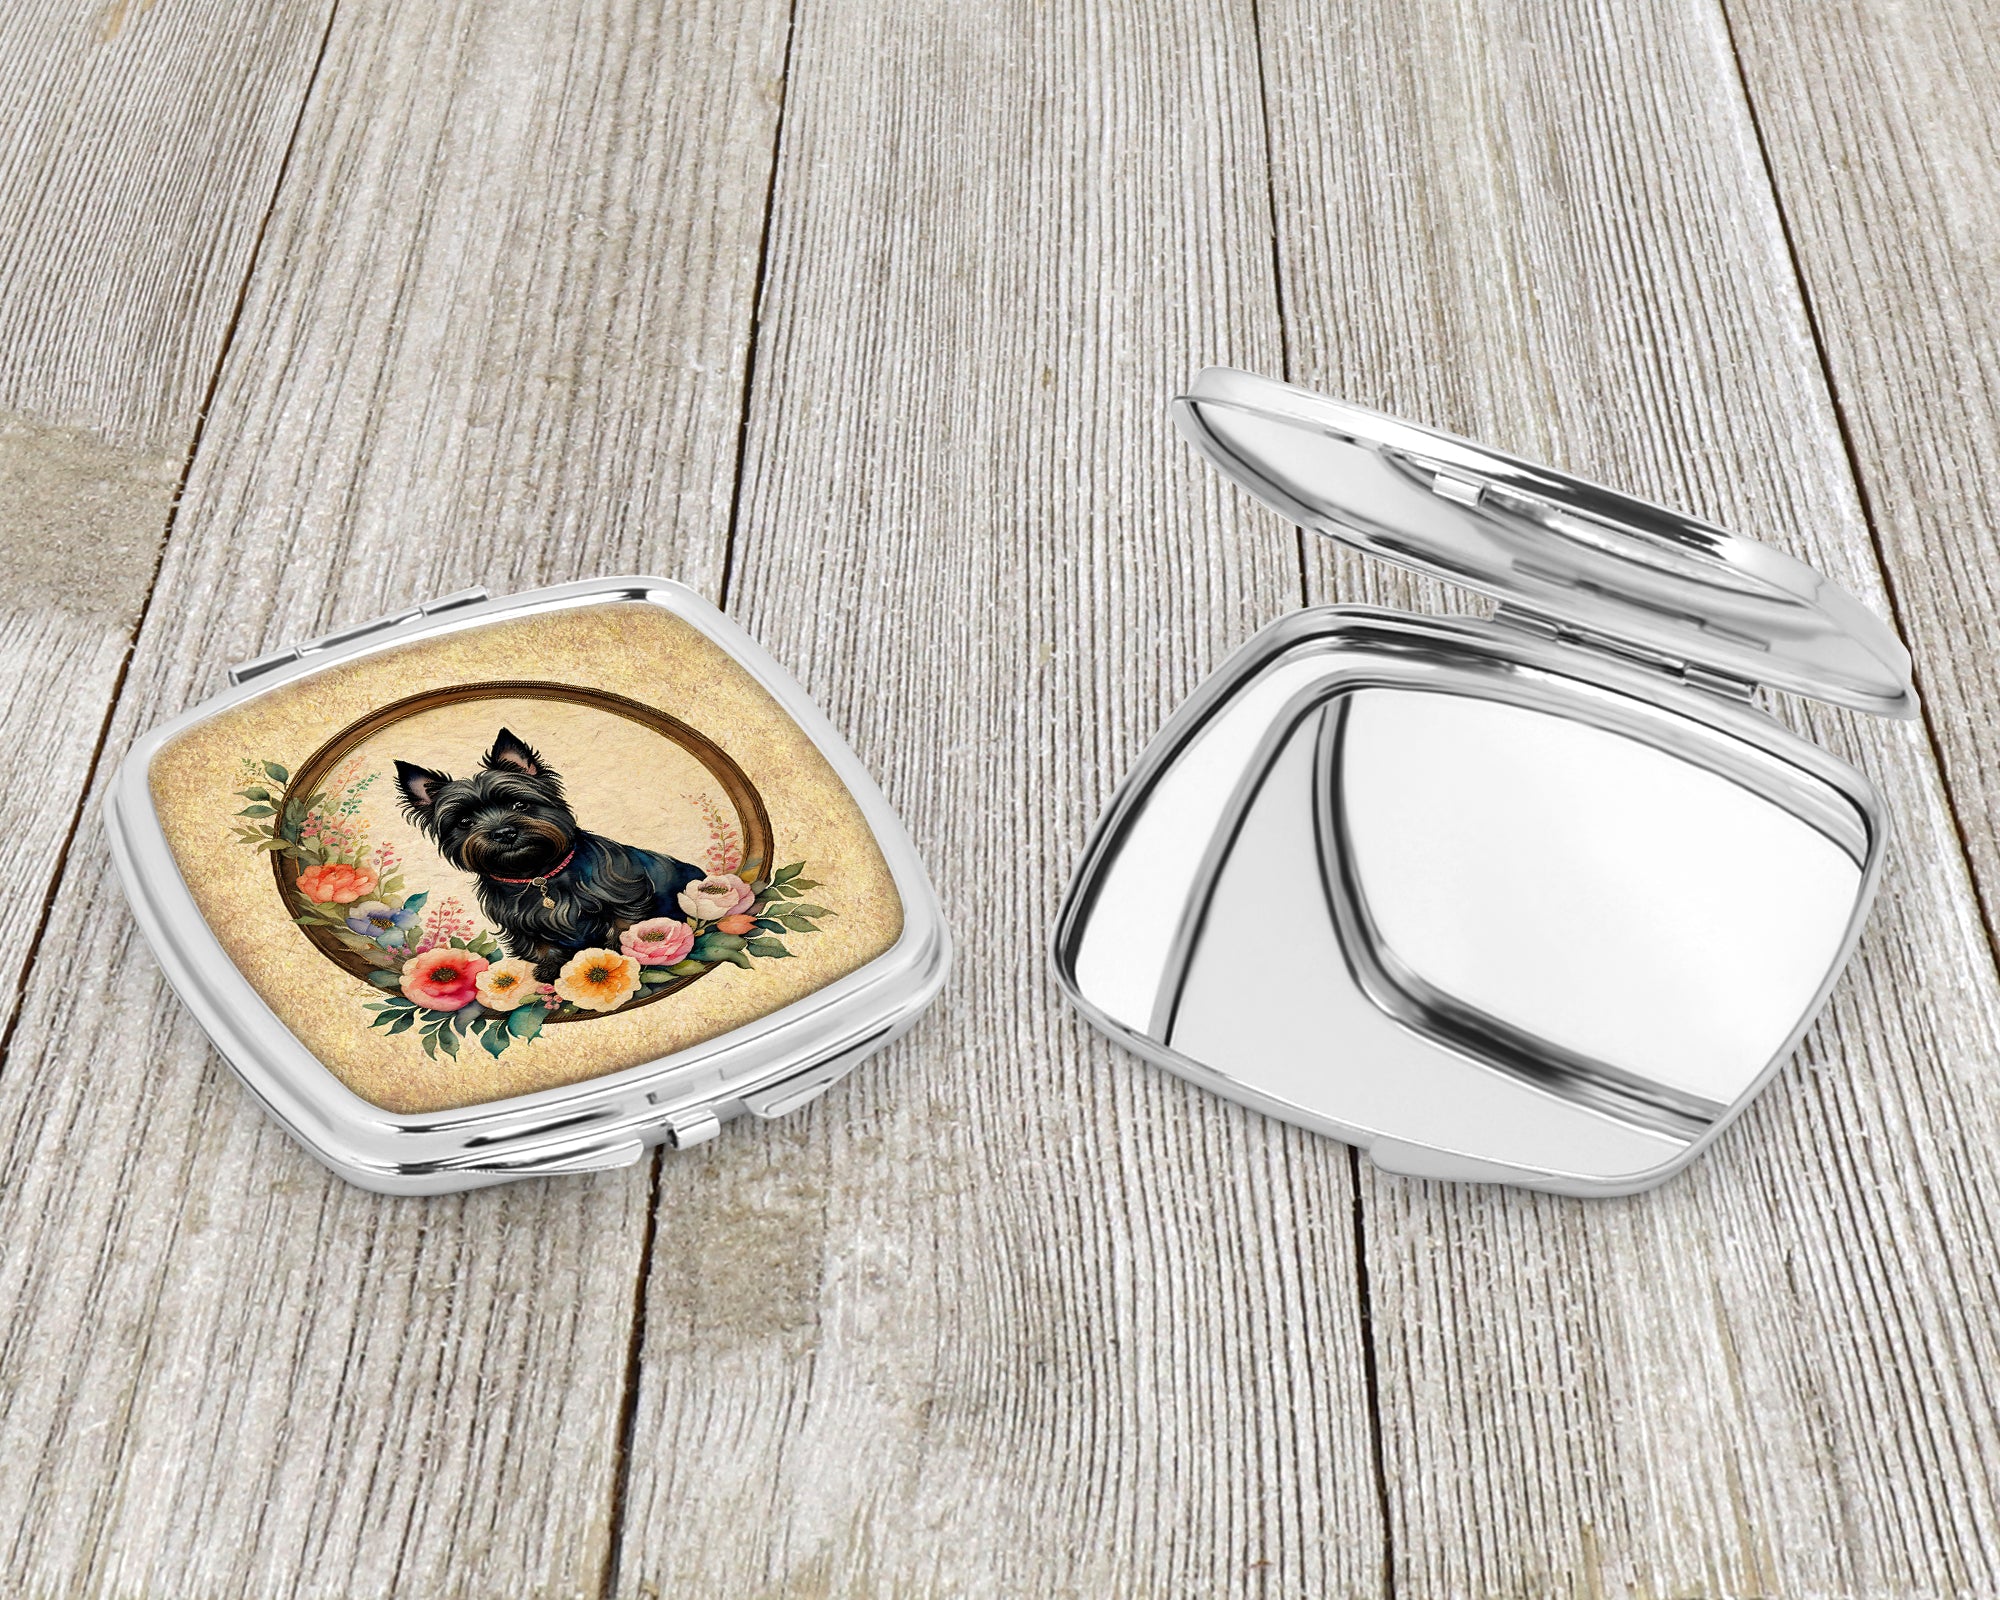 Cairn Terrier and Flowers Compact Mirror